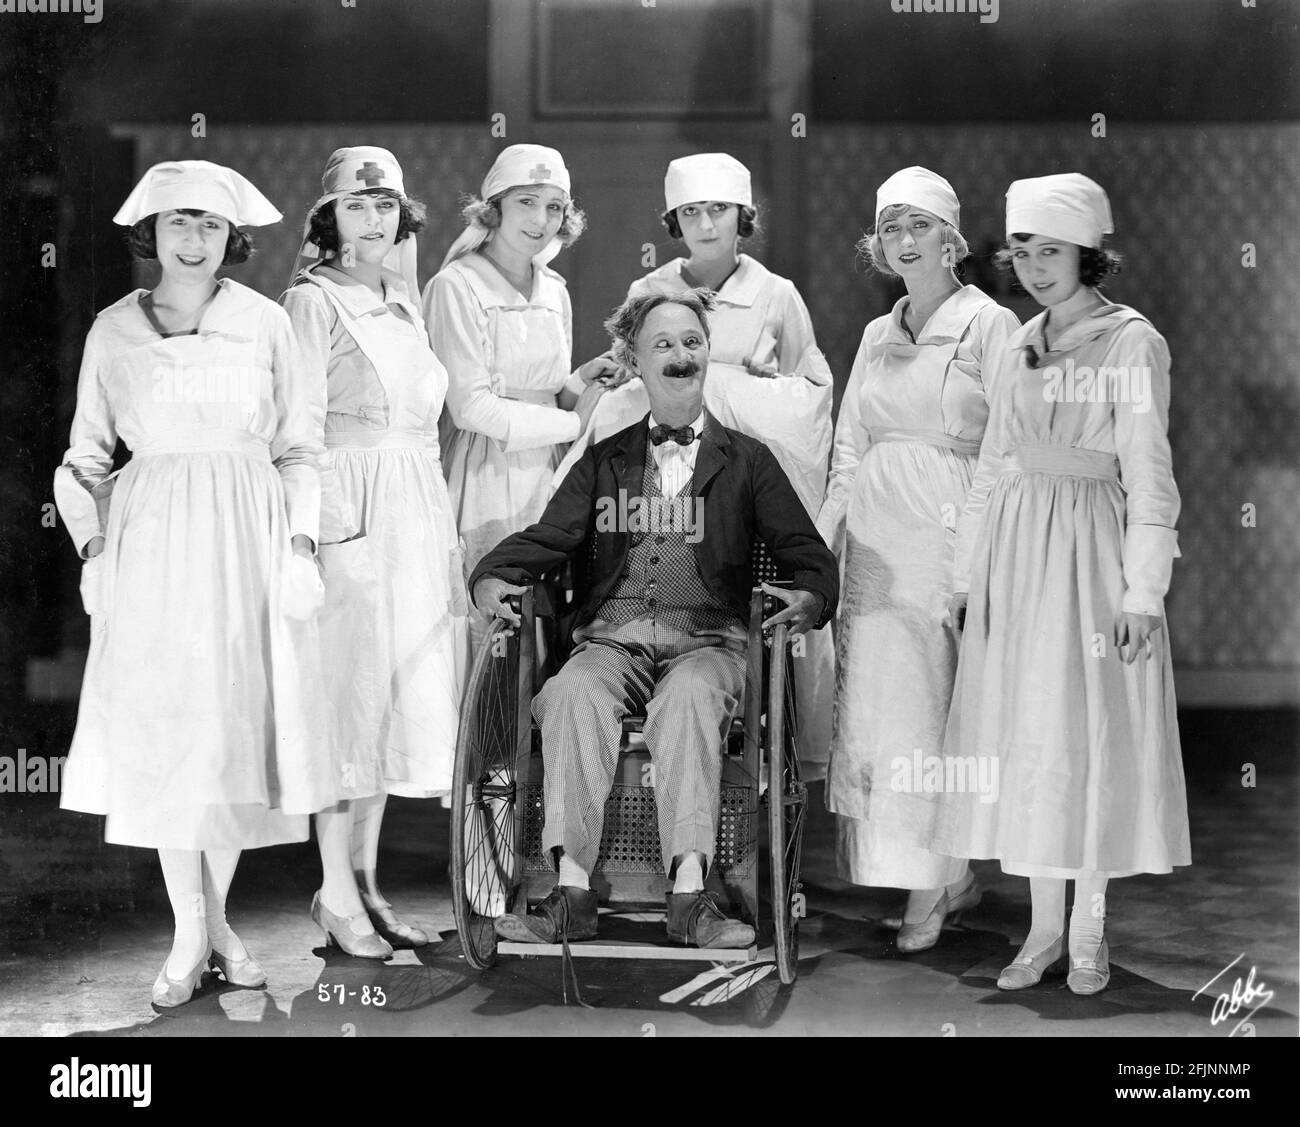 Cross-Eyed Comedian BEN TURPIN surrounded by MACK SENNETT BATHING BEAUTIES JANE ALLEN VIRGINIA FOX PHYLLIS HAVER KATHRYN McGUIRE THELMA HILL and THELMA BATES dressed as Nurses on set portrait by JAMES ABBE for the silent comedy short MARRIED LIFE 1920 director ERLE C. KENTON Mack Sennett Comedies / Associated First National Pictures Stock Photo